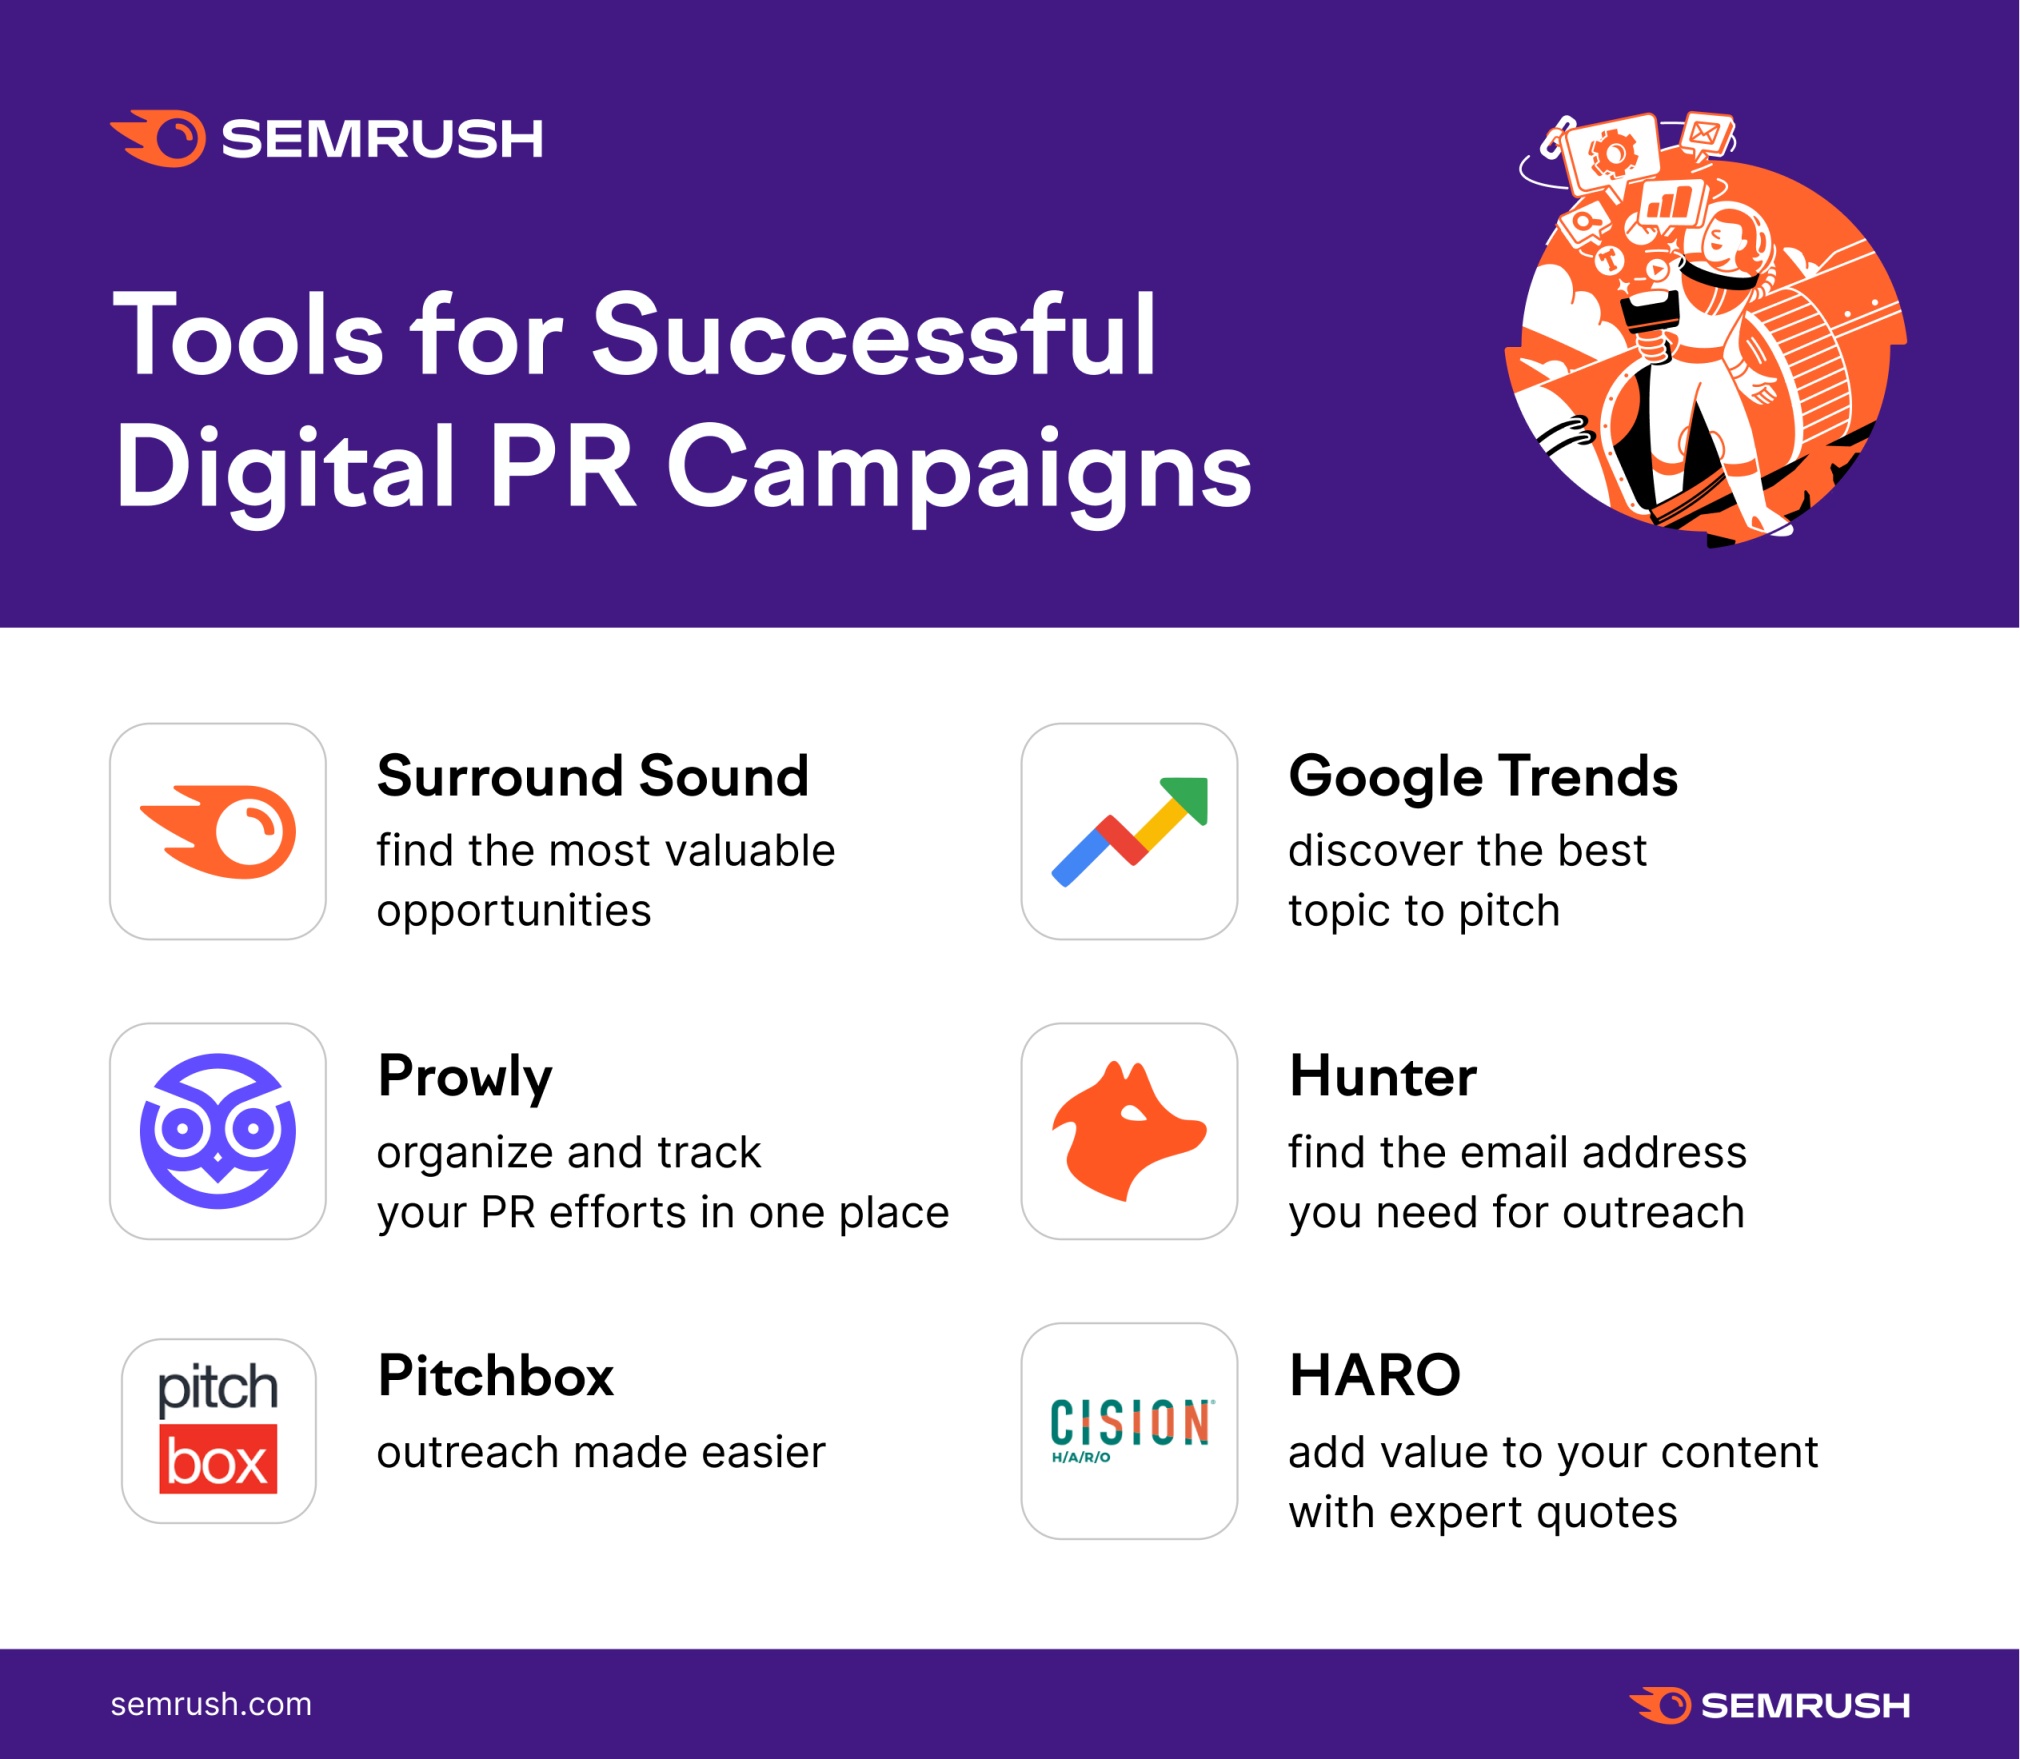 Tools for Successful Digital PR campaigns - Surround sound, Prowly, Pitchbox, Google Trends, HARO, Hunter